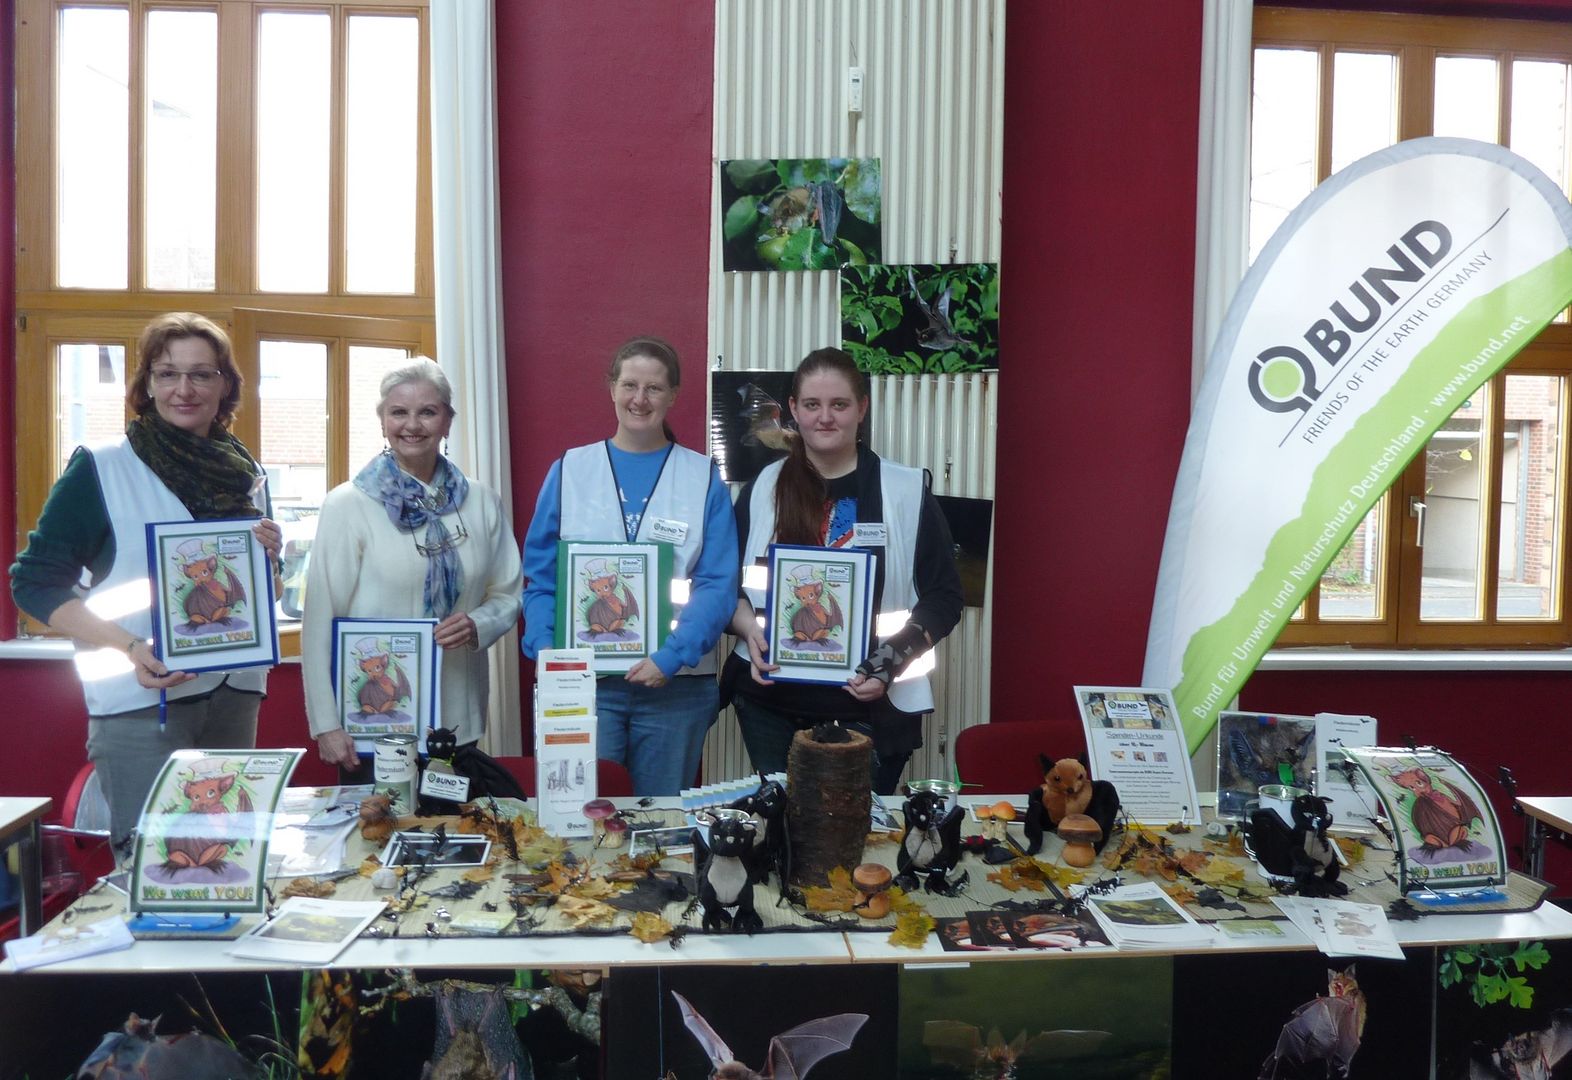 Das Foto zeigt vier Mitglieder der AG Fledermäuse des BUND Region Hannover am Infostand // The photo shows four members of the Bat Conservation Team Friends of the Earth Hannover Germany at an information boost